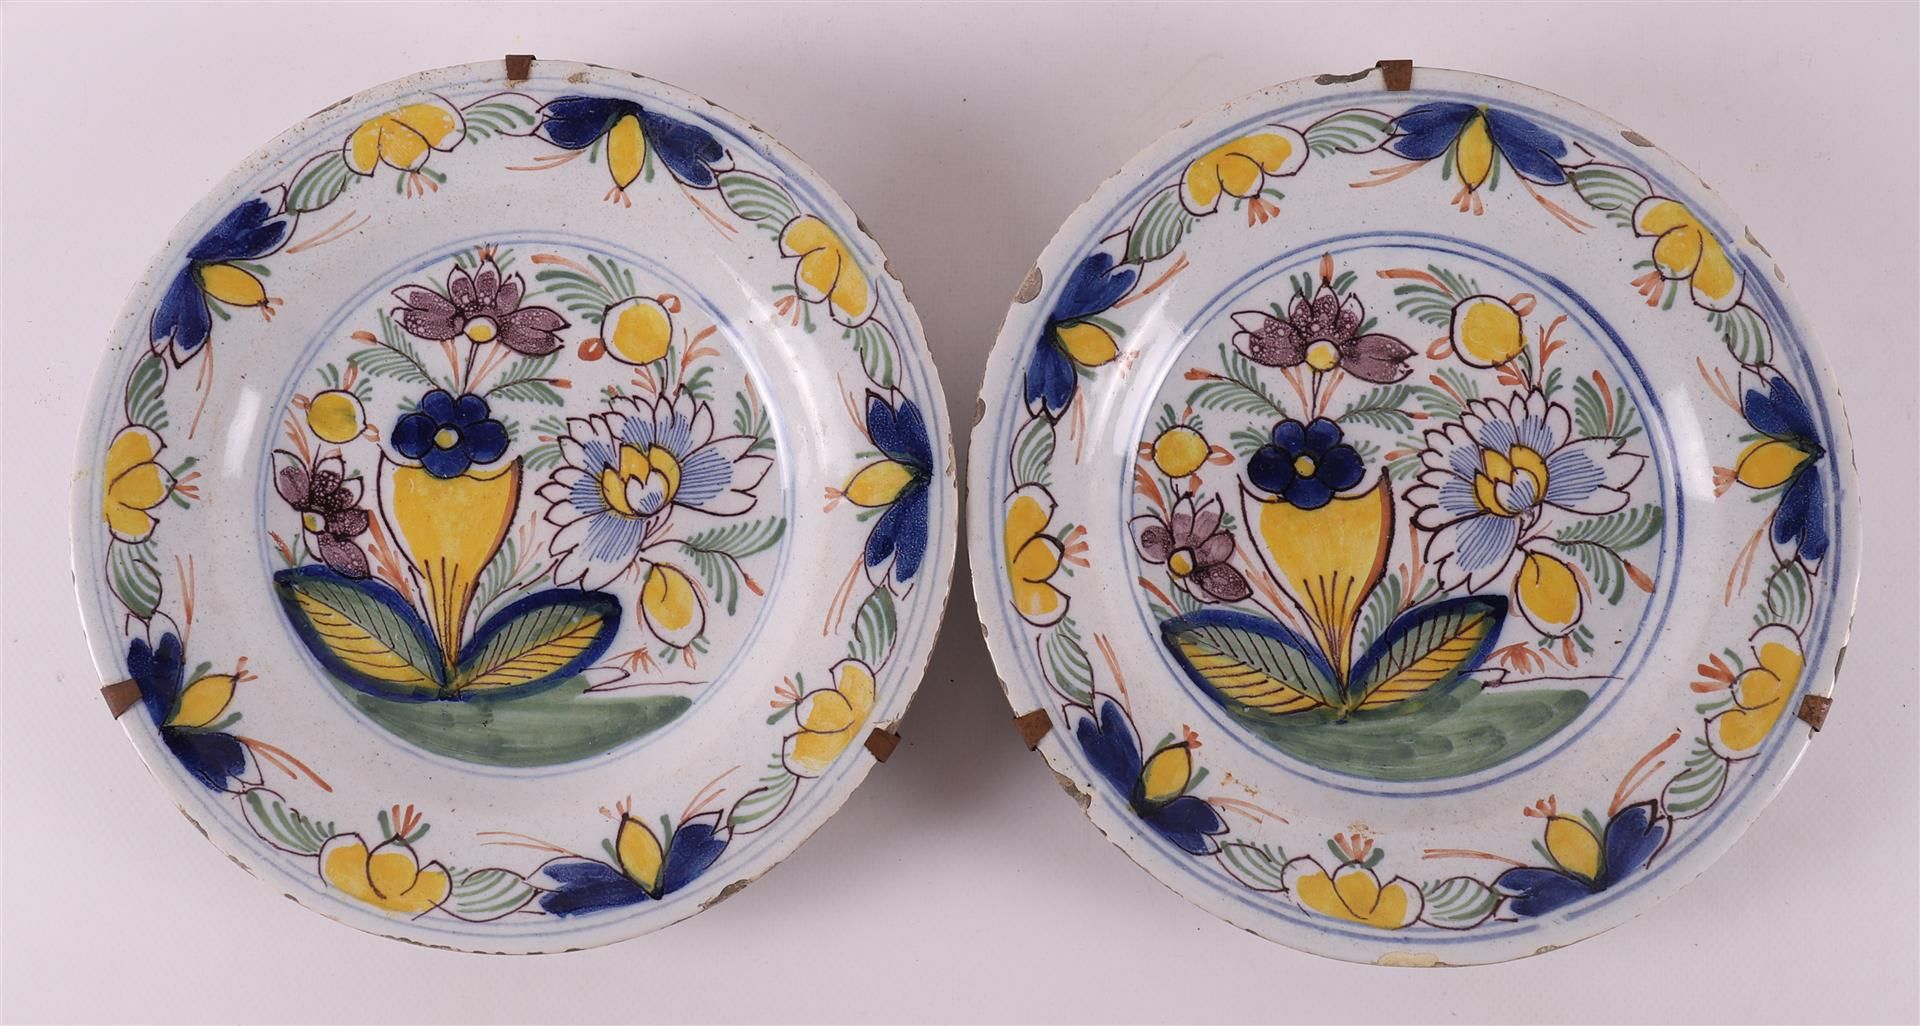 A series of six Delft earthenware plates, 18th century. - Image 5 of 8